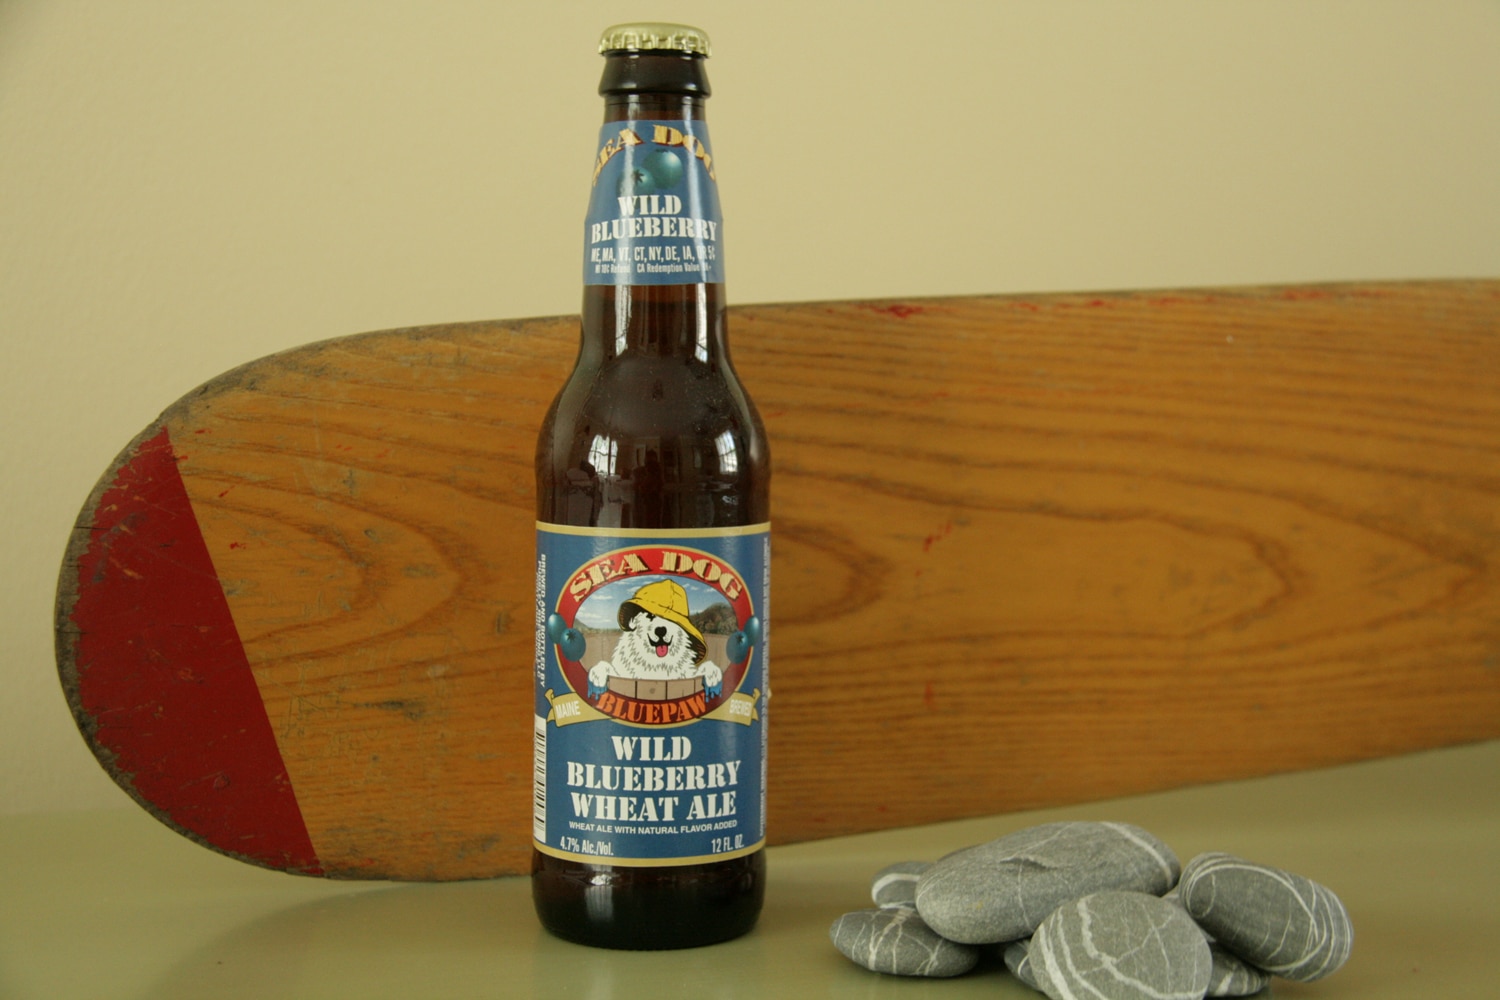 Drink summer blueberry beer from Sea Dog.